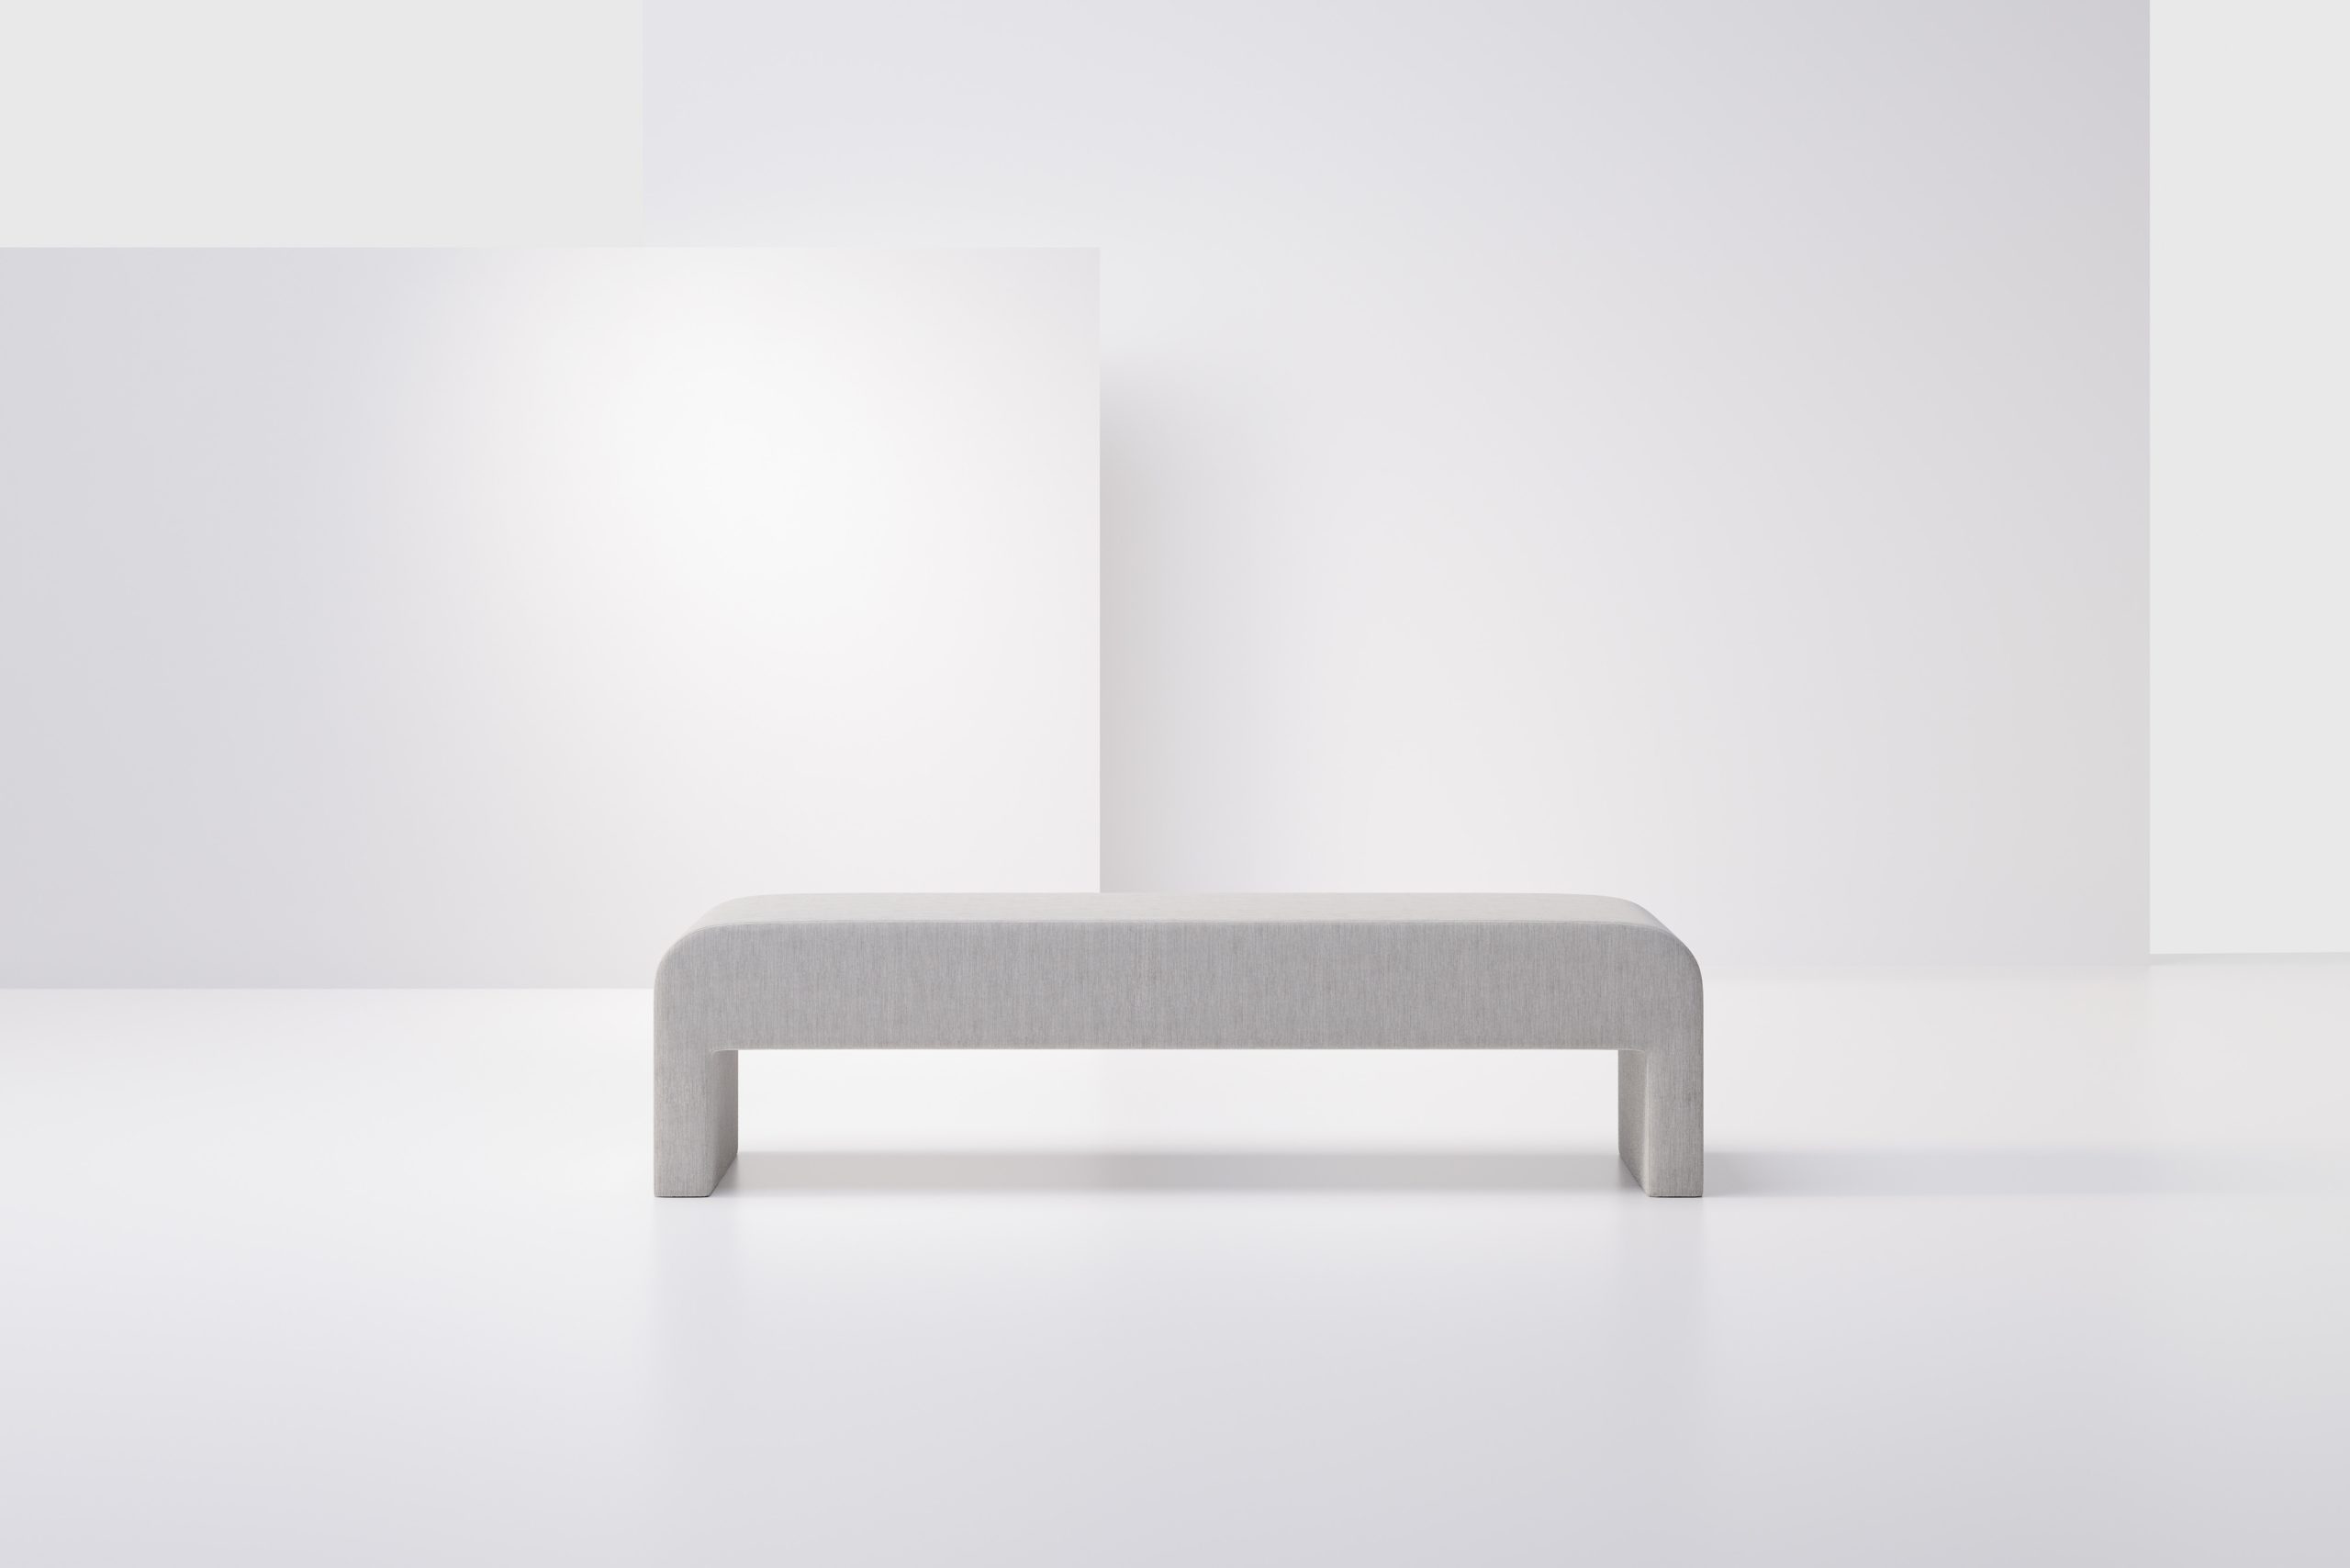 Bryce 72 Bench Product Image 2